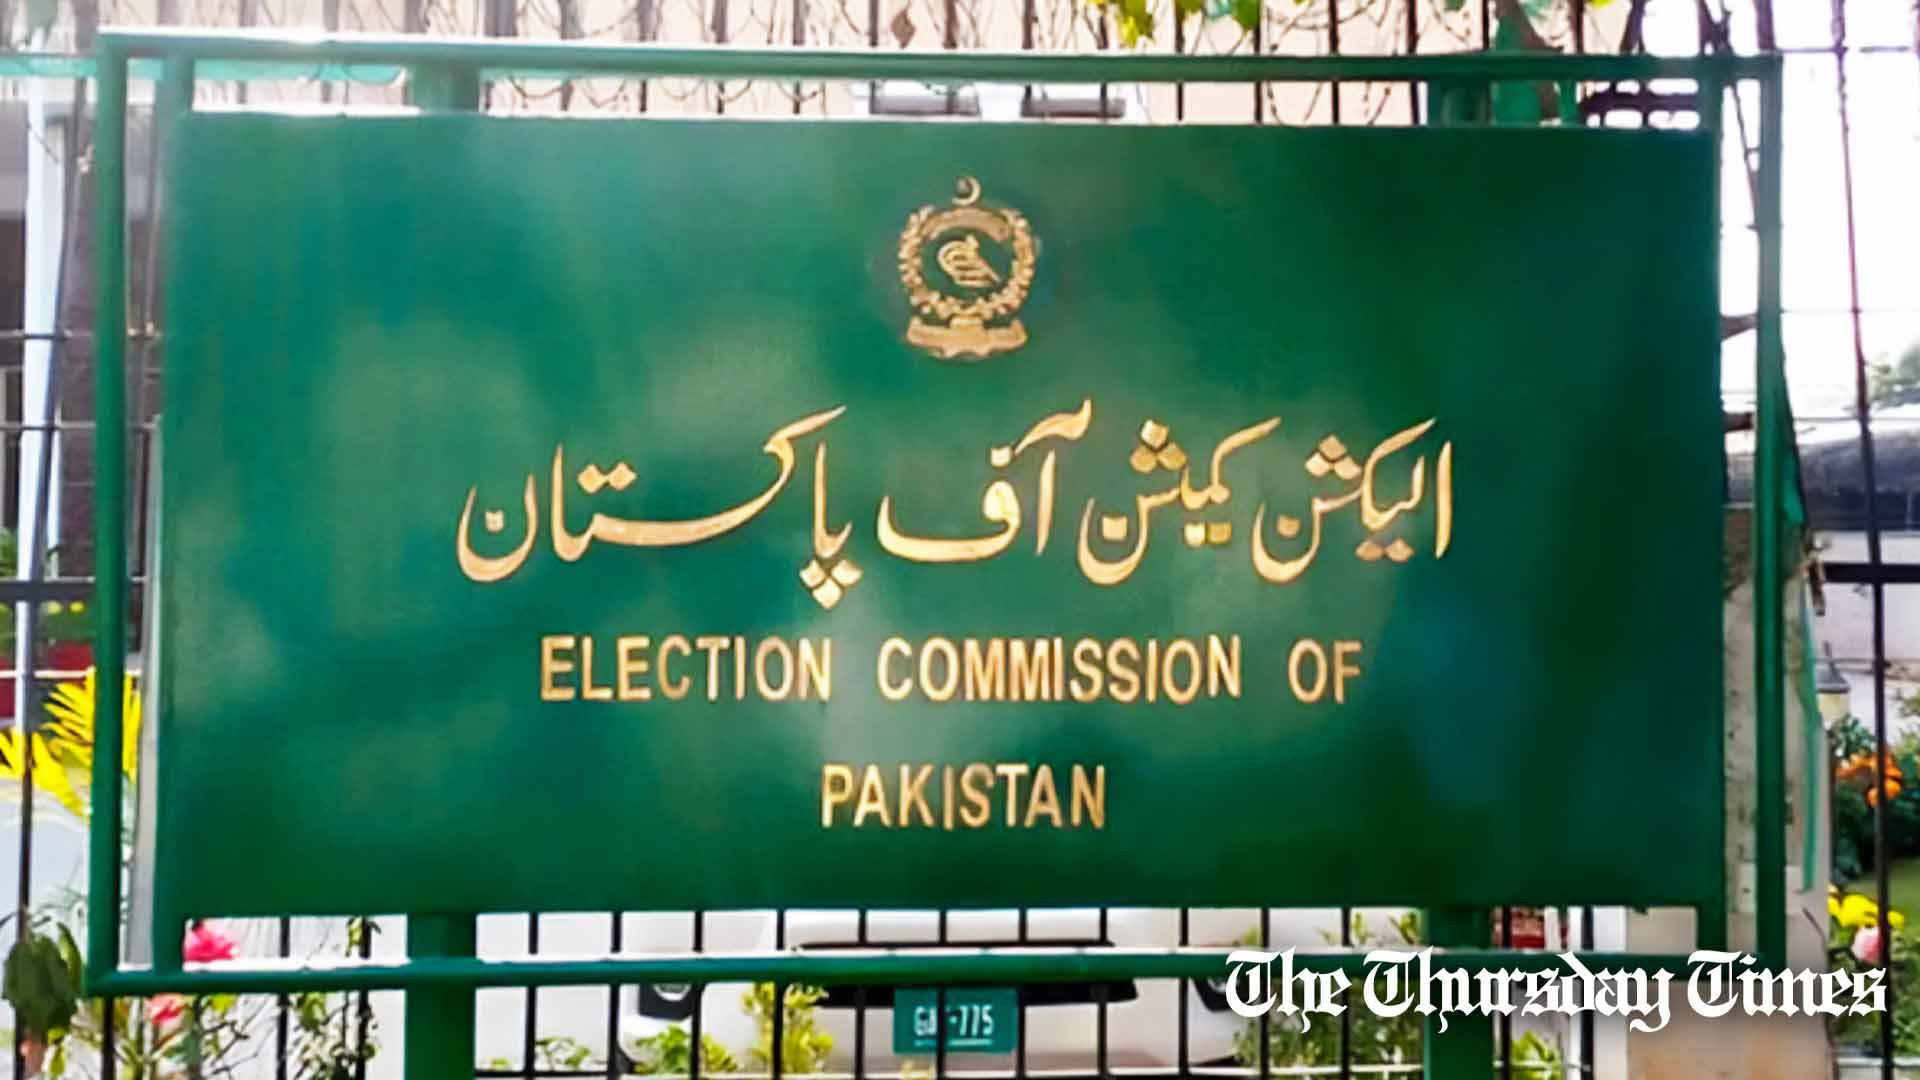 A file photo is shown of an Election Commission of Pakistan signpost at Islamabad. — FILE/THE THURSDAY TIMES